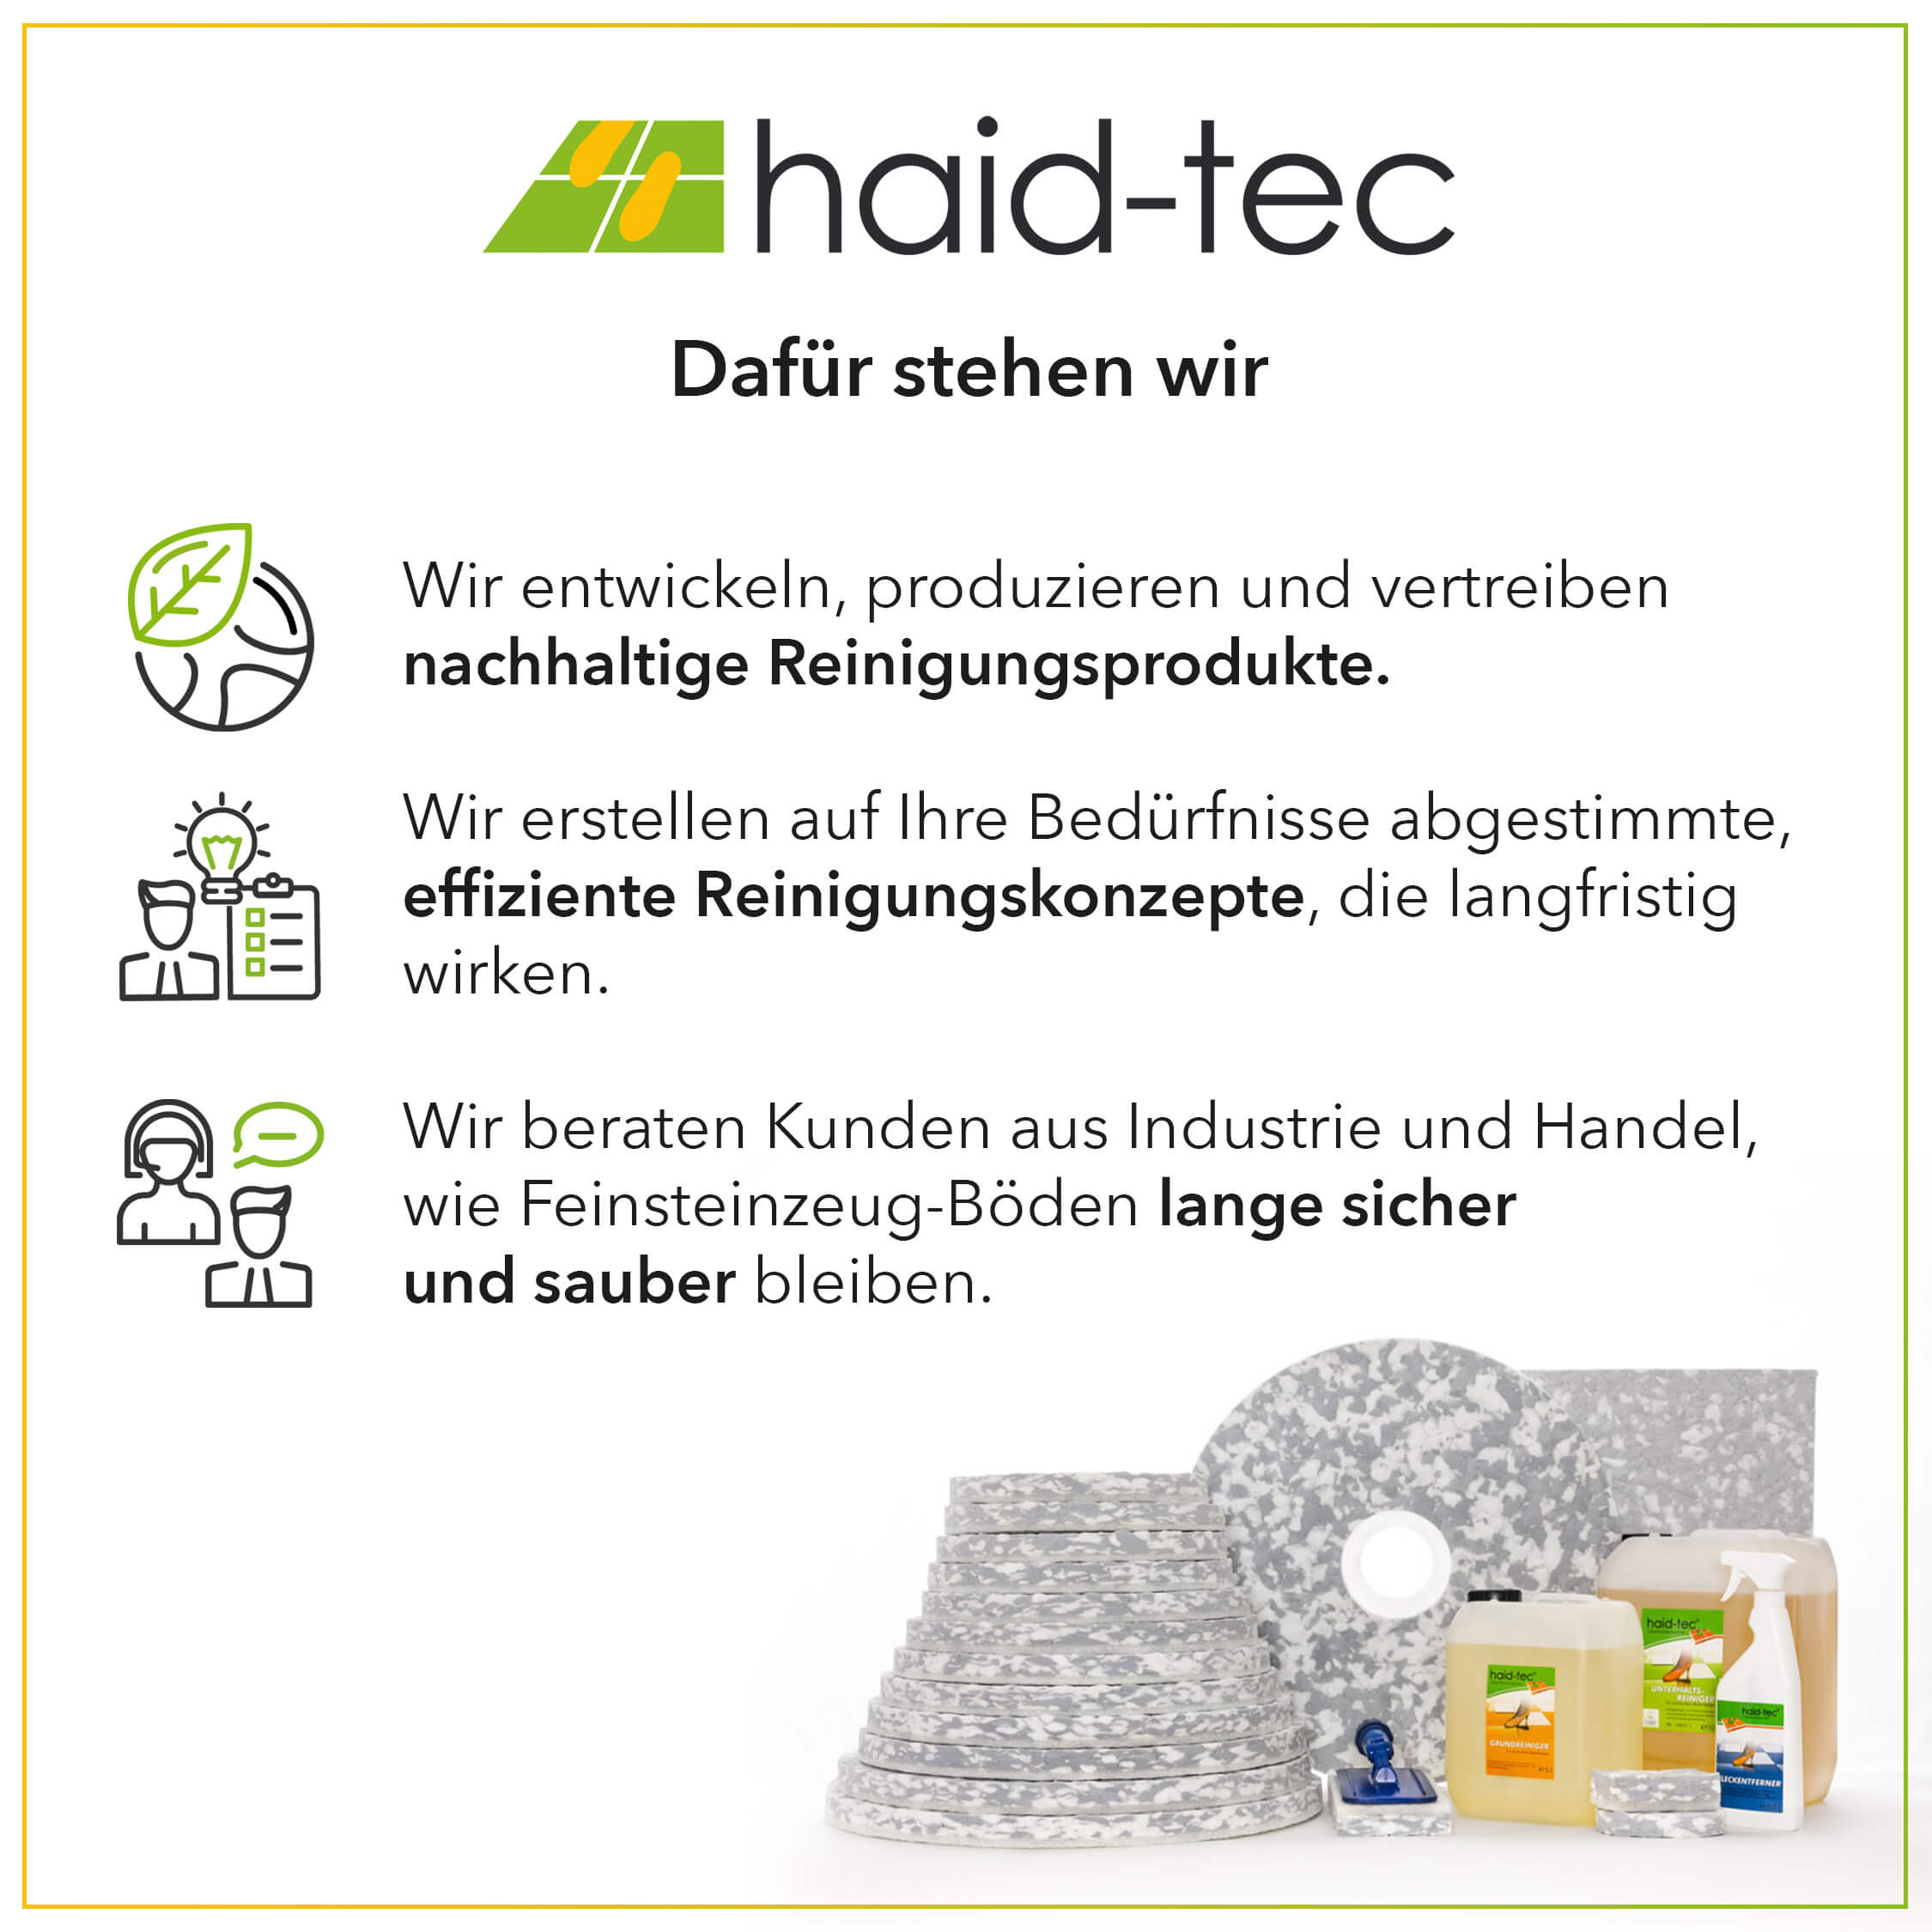 haid-tec Workshop cleaner 5 L, oil stain remover, industrial cleaner - concentrate - biodegradable - made in Germany